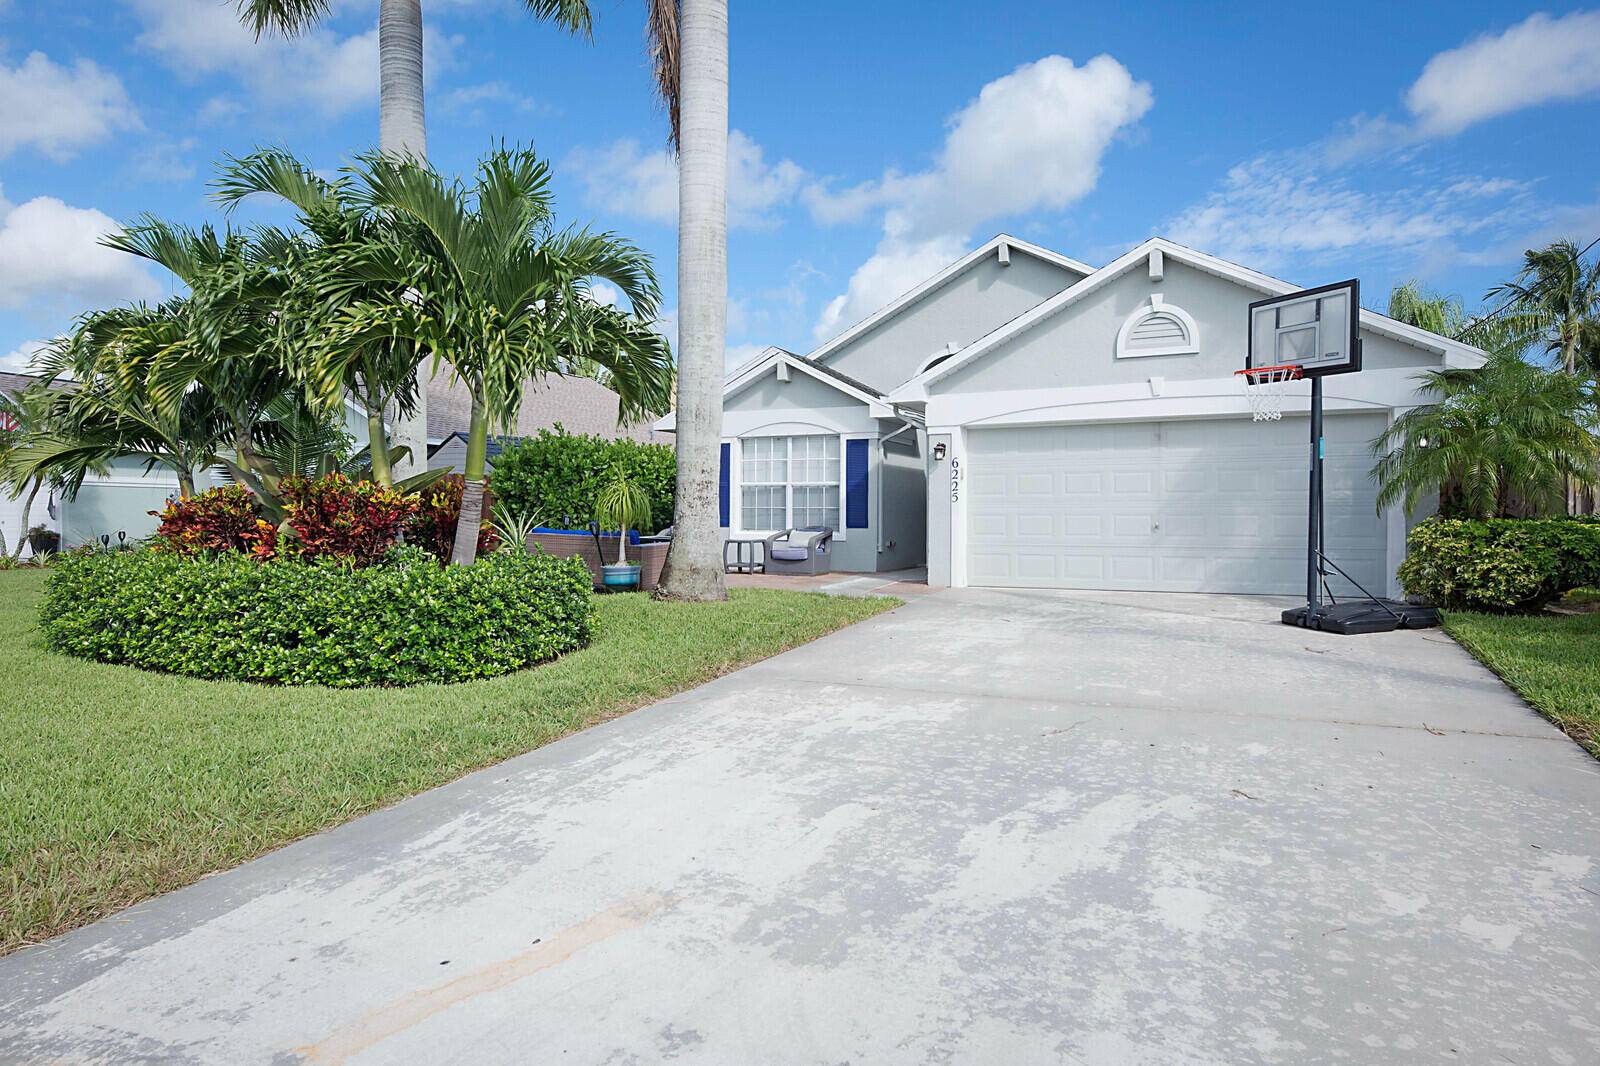 ABSOLUTELY beautiful home in the sought after Jupiter Heights community.